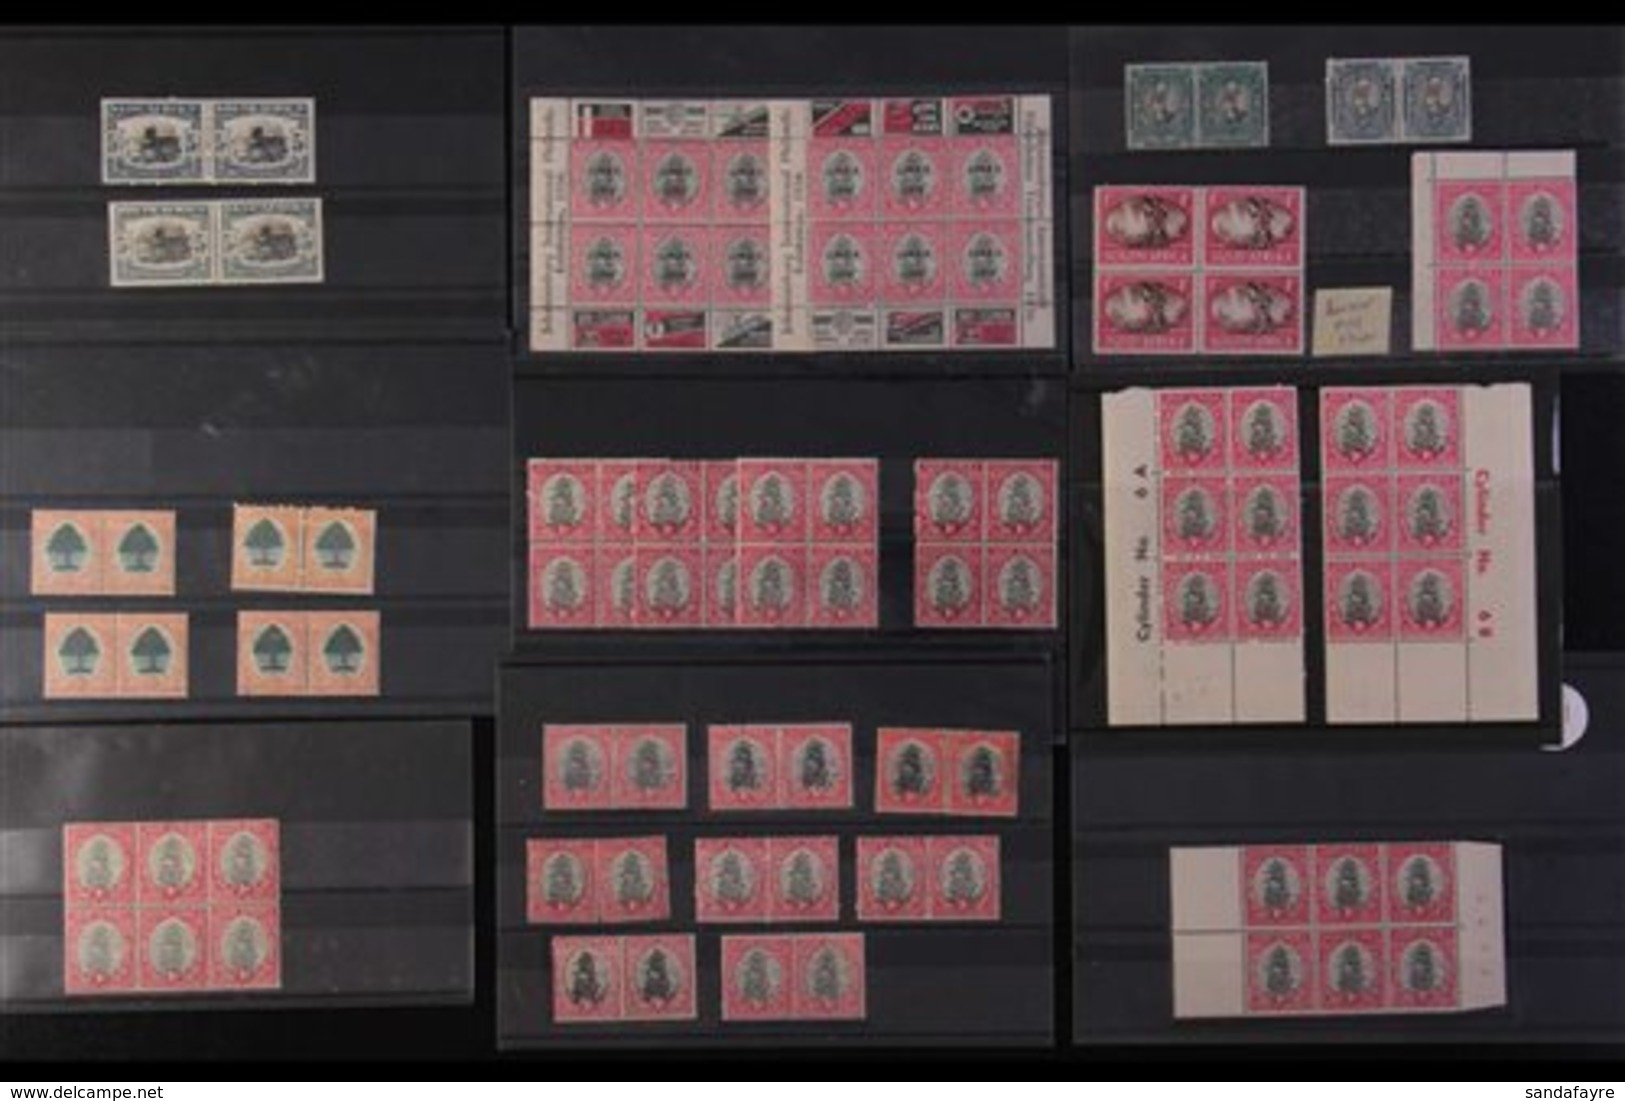 1926-1949 SPECIALIST'S BETTER FINE MINT ASSEMBLY  On Stock Cards & Pages, Some Stamps Are Never Hinged, All As Horiz Pai - Unclassified